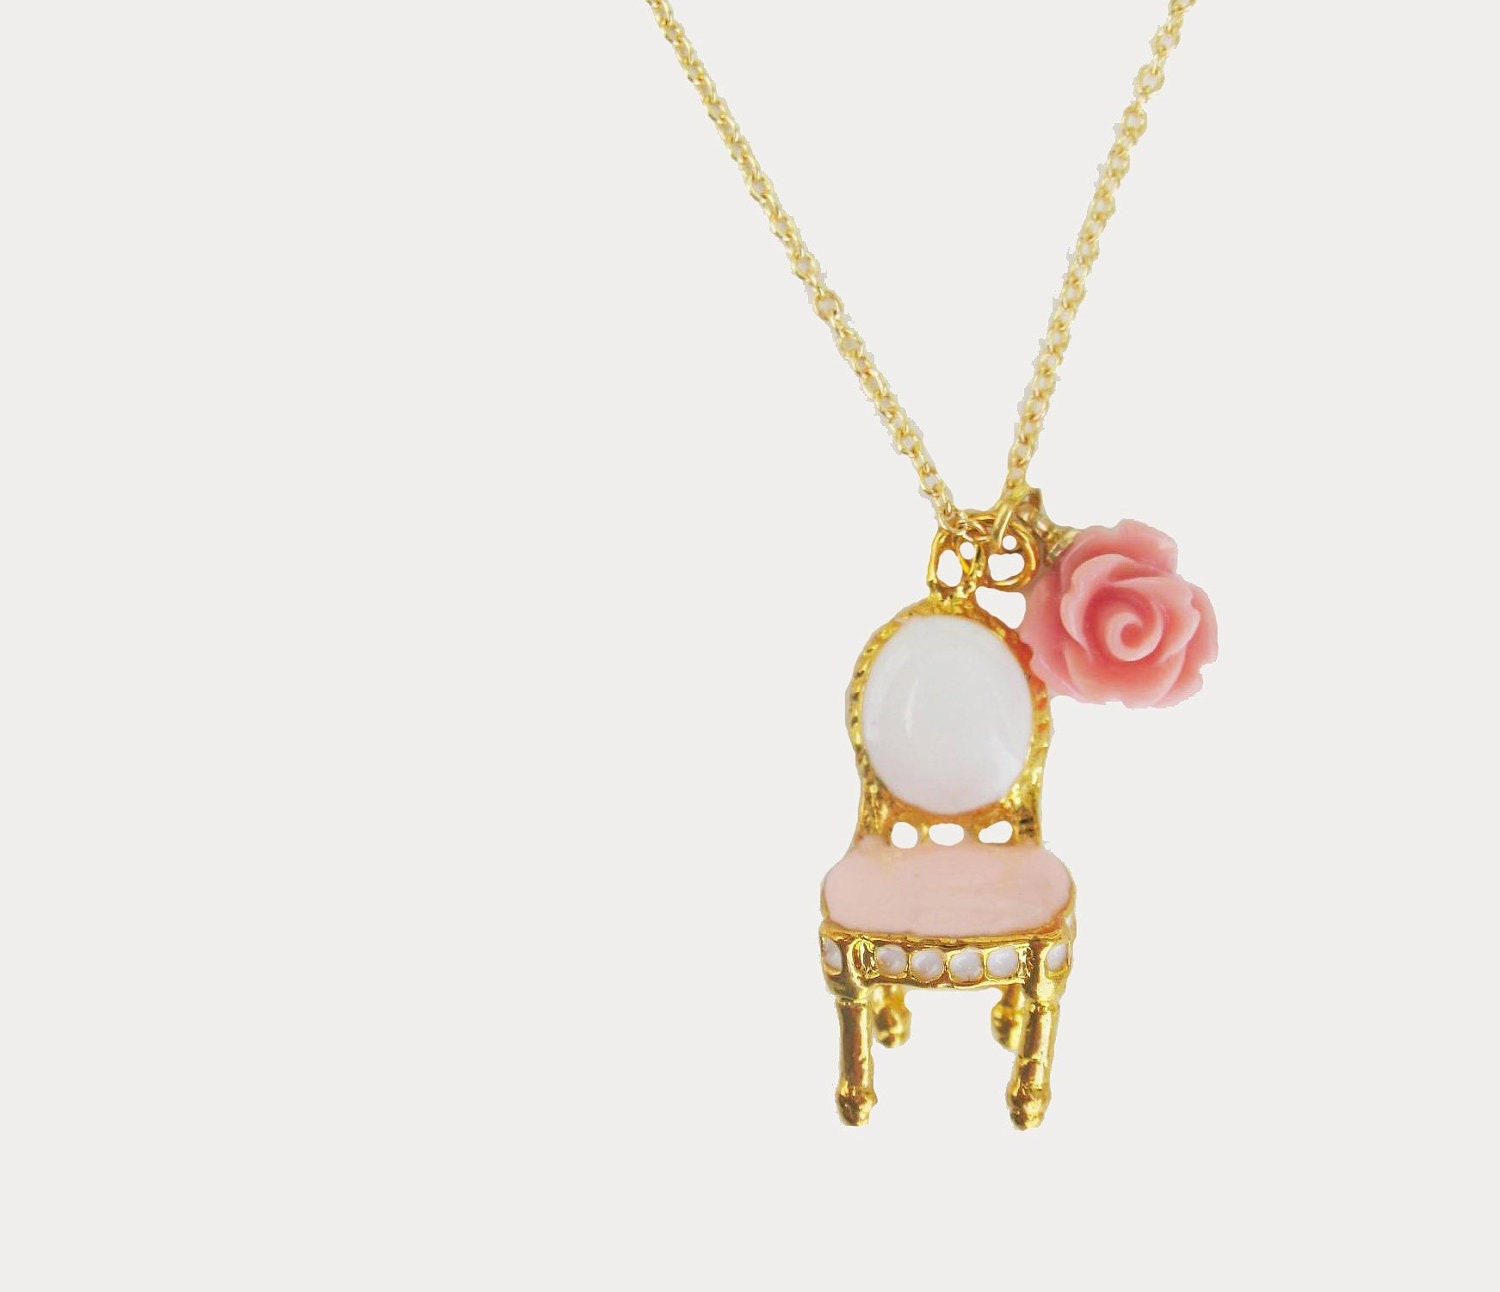 Louis XVI chair necklace with little pink rose. Pink and white enamel - 53Countesses